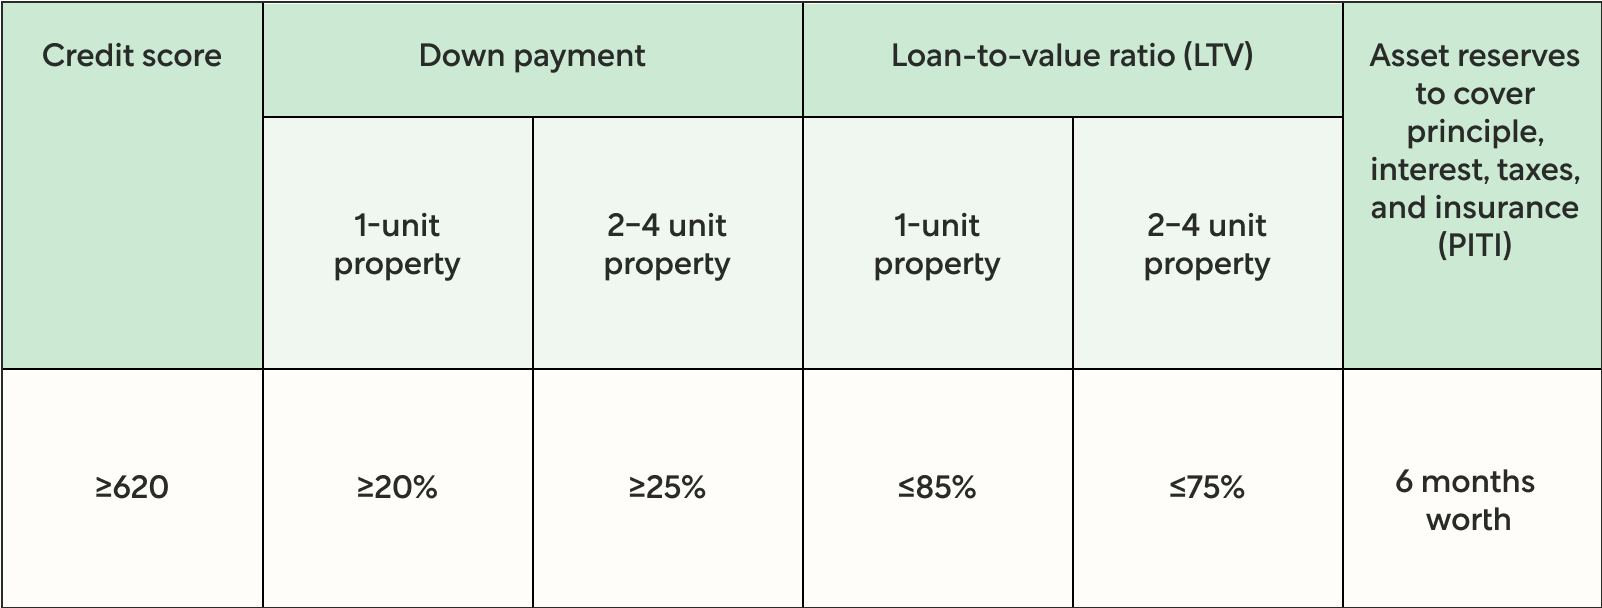 Table Outlining Requirements for Credit Score, Down Payment, Loan-to-value Ratio, and Asset Reserves to Cover Principle, Interest, Taxes, and Insurance by Property Type